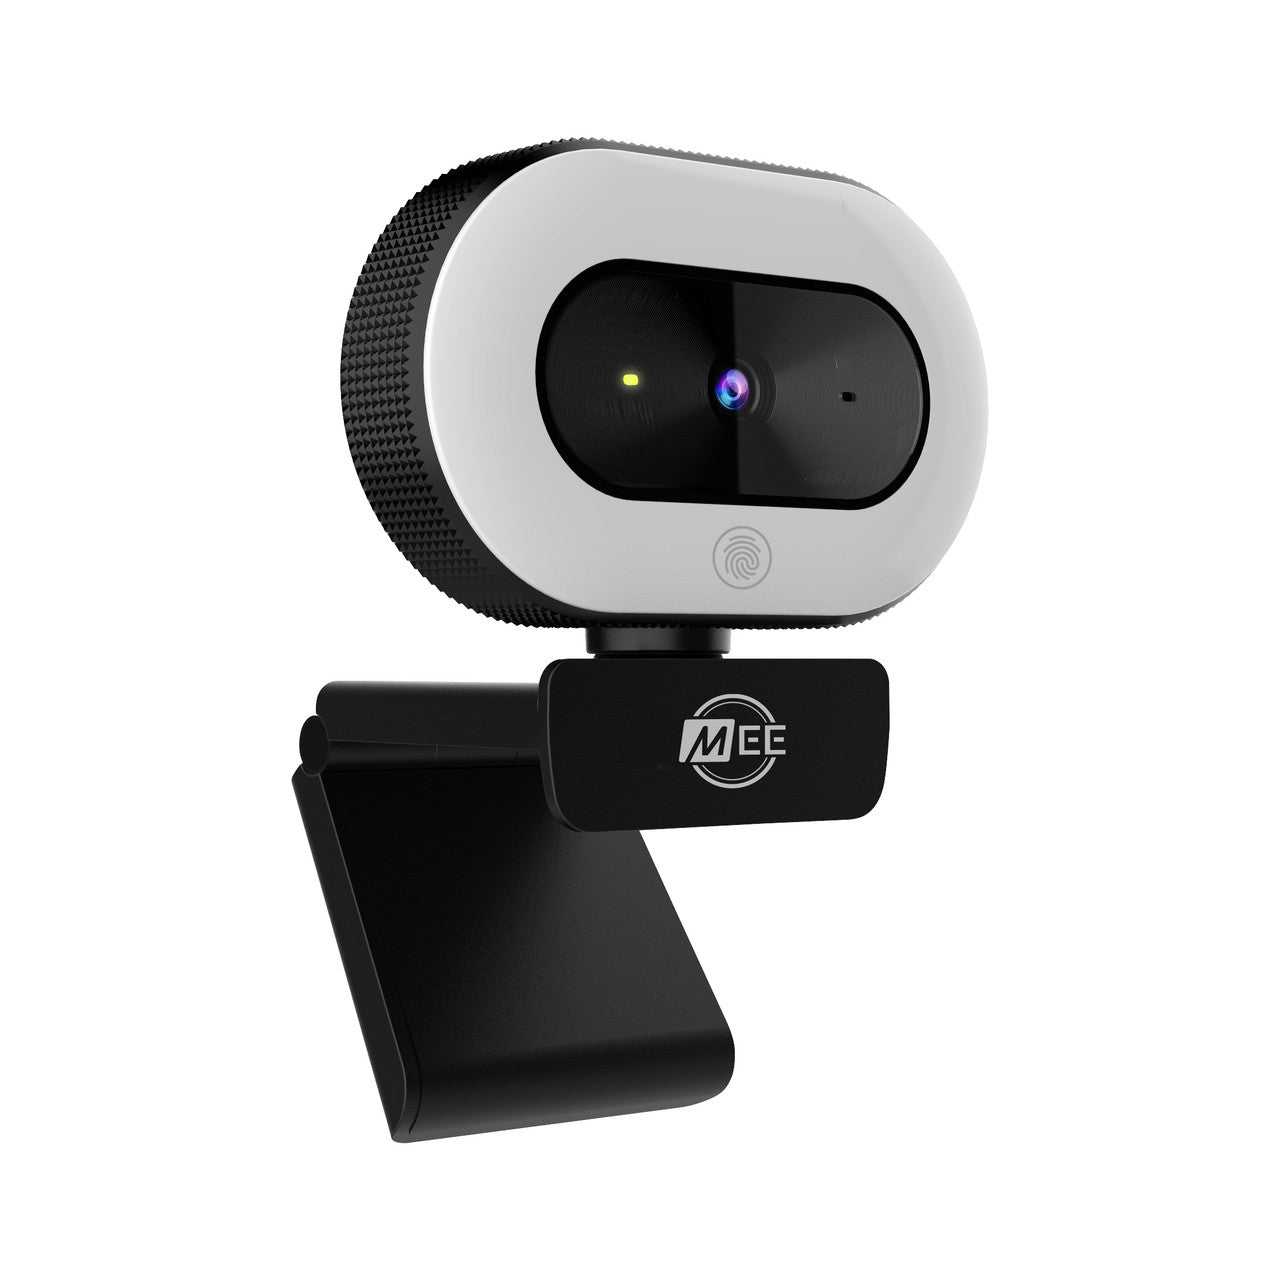 Image of CL8A 1080p Live Webcam with LED Ring Light.